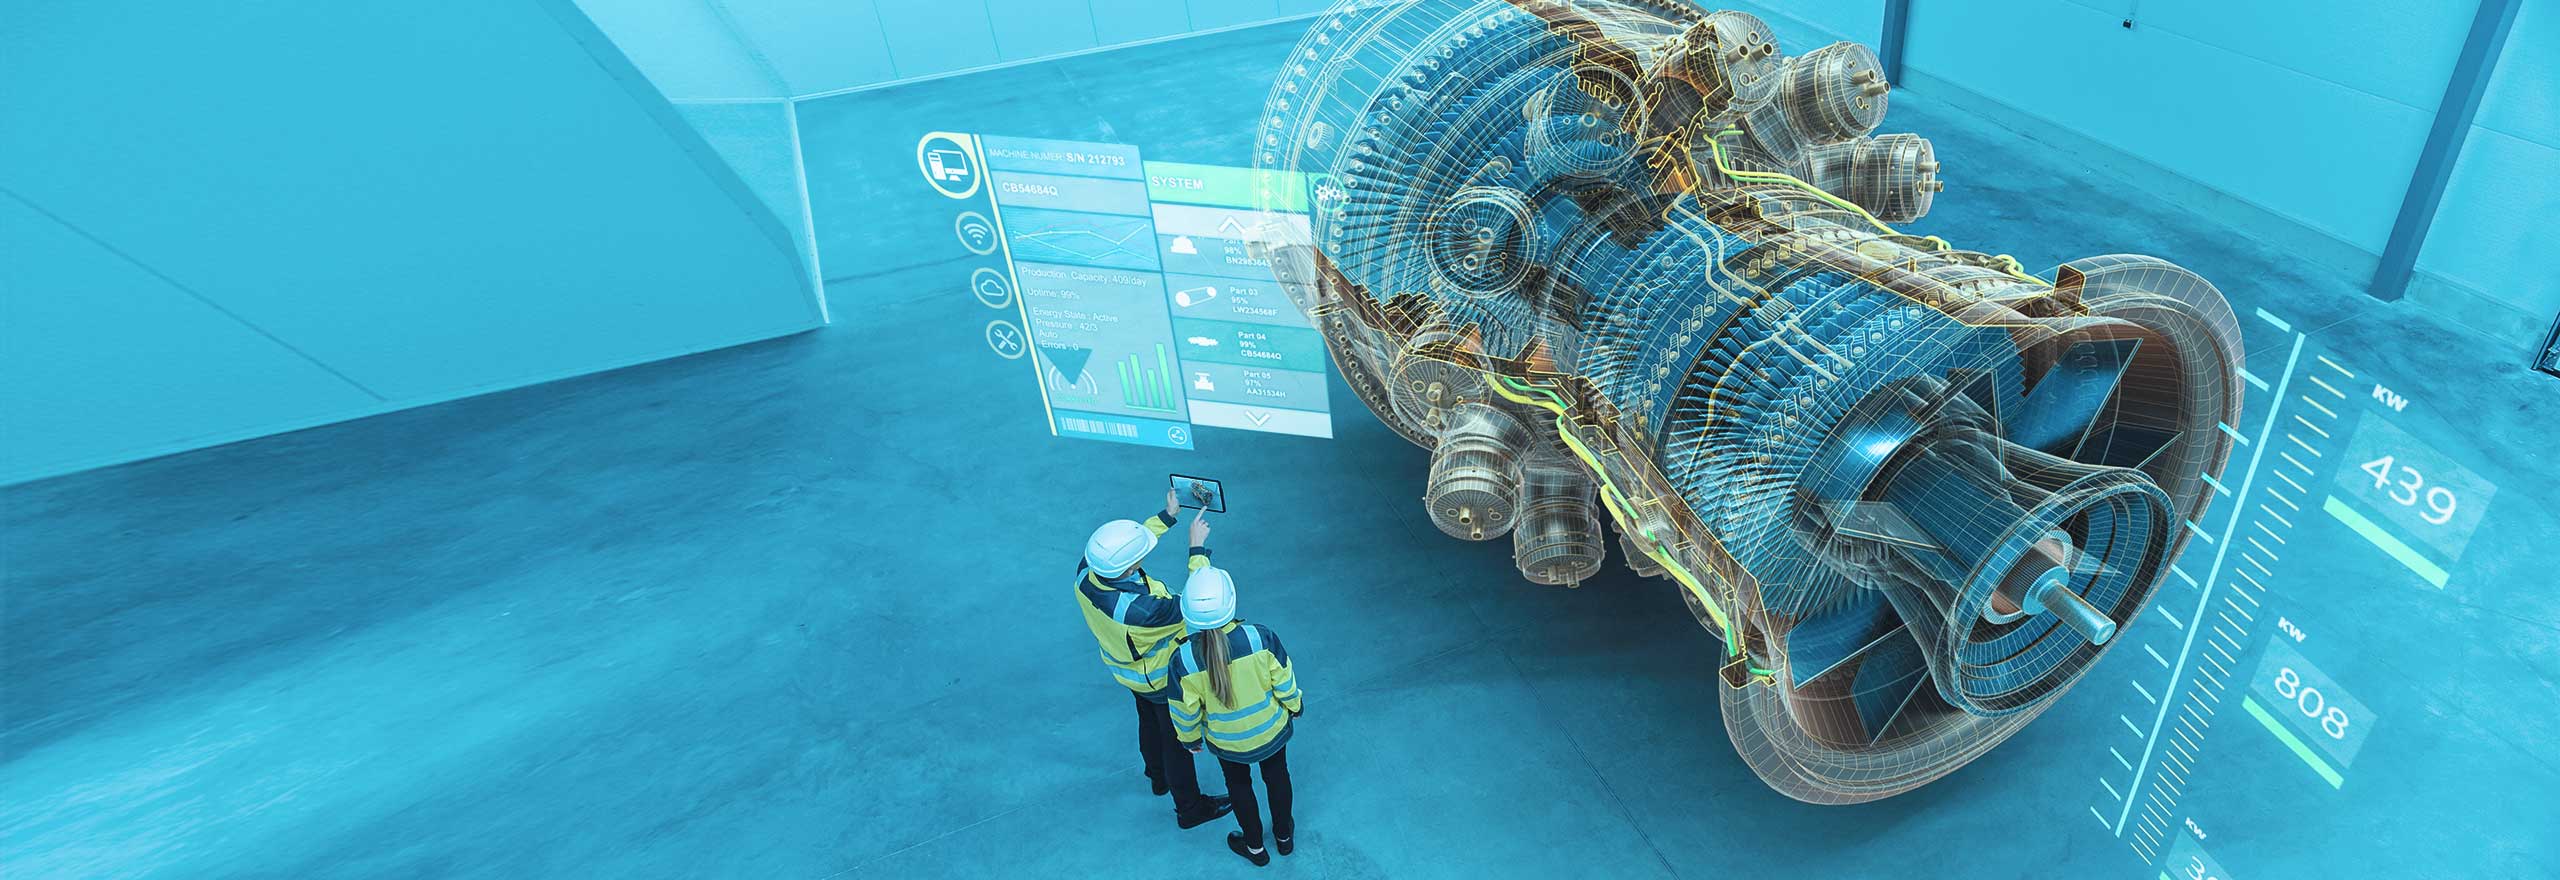 Two engineers inspecting a gas turbine with data overlay